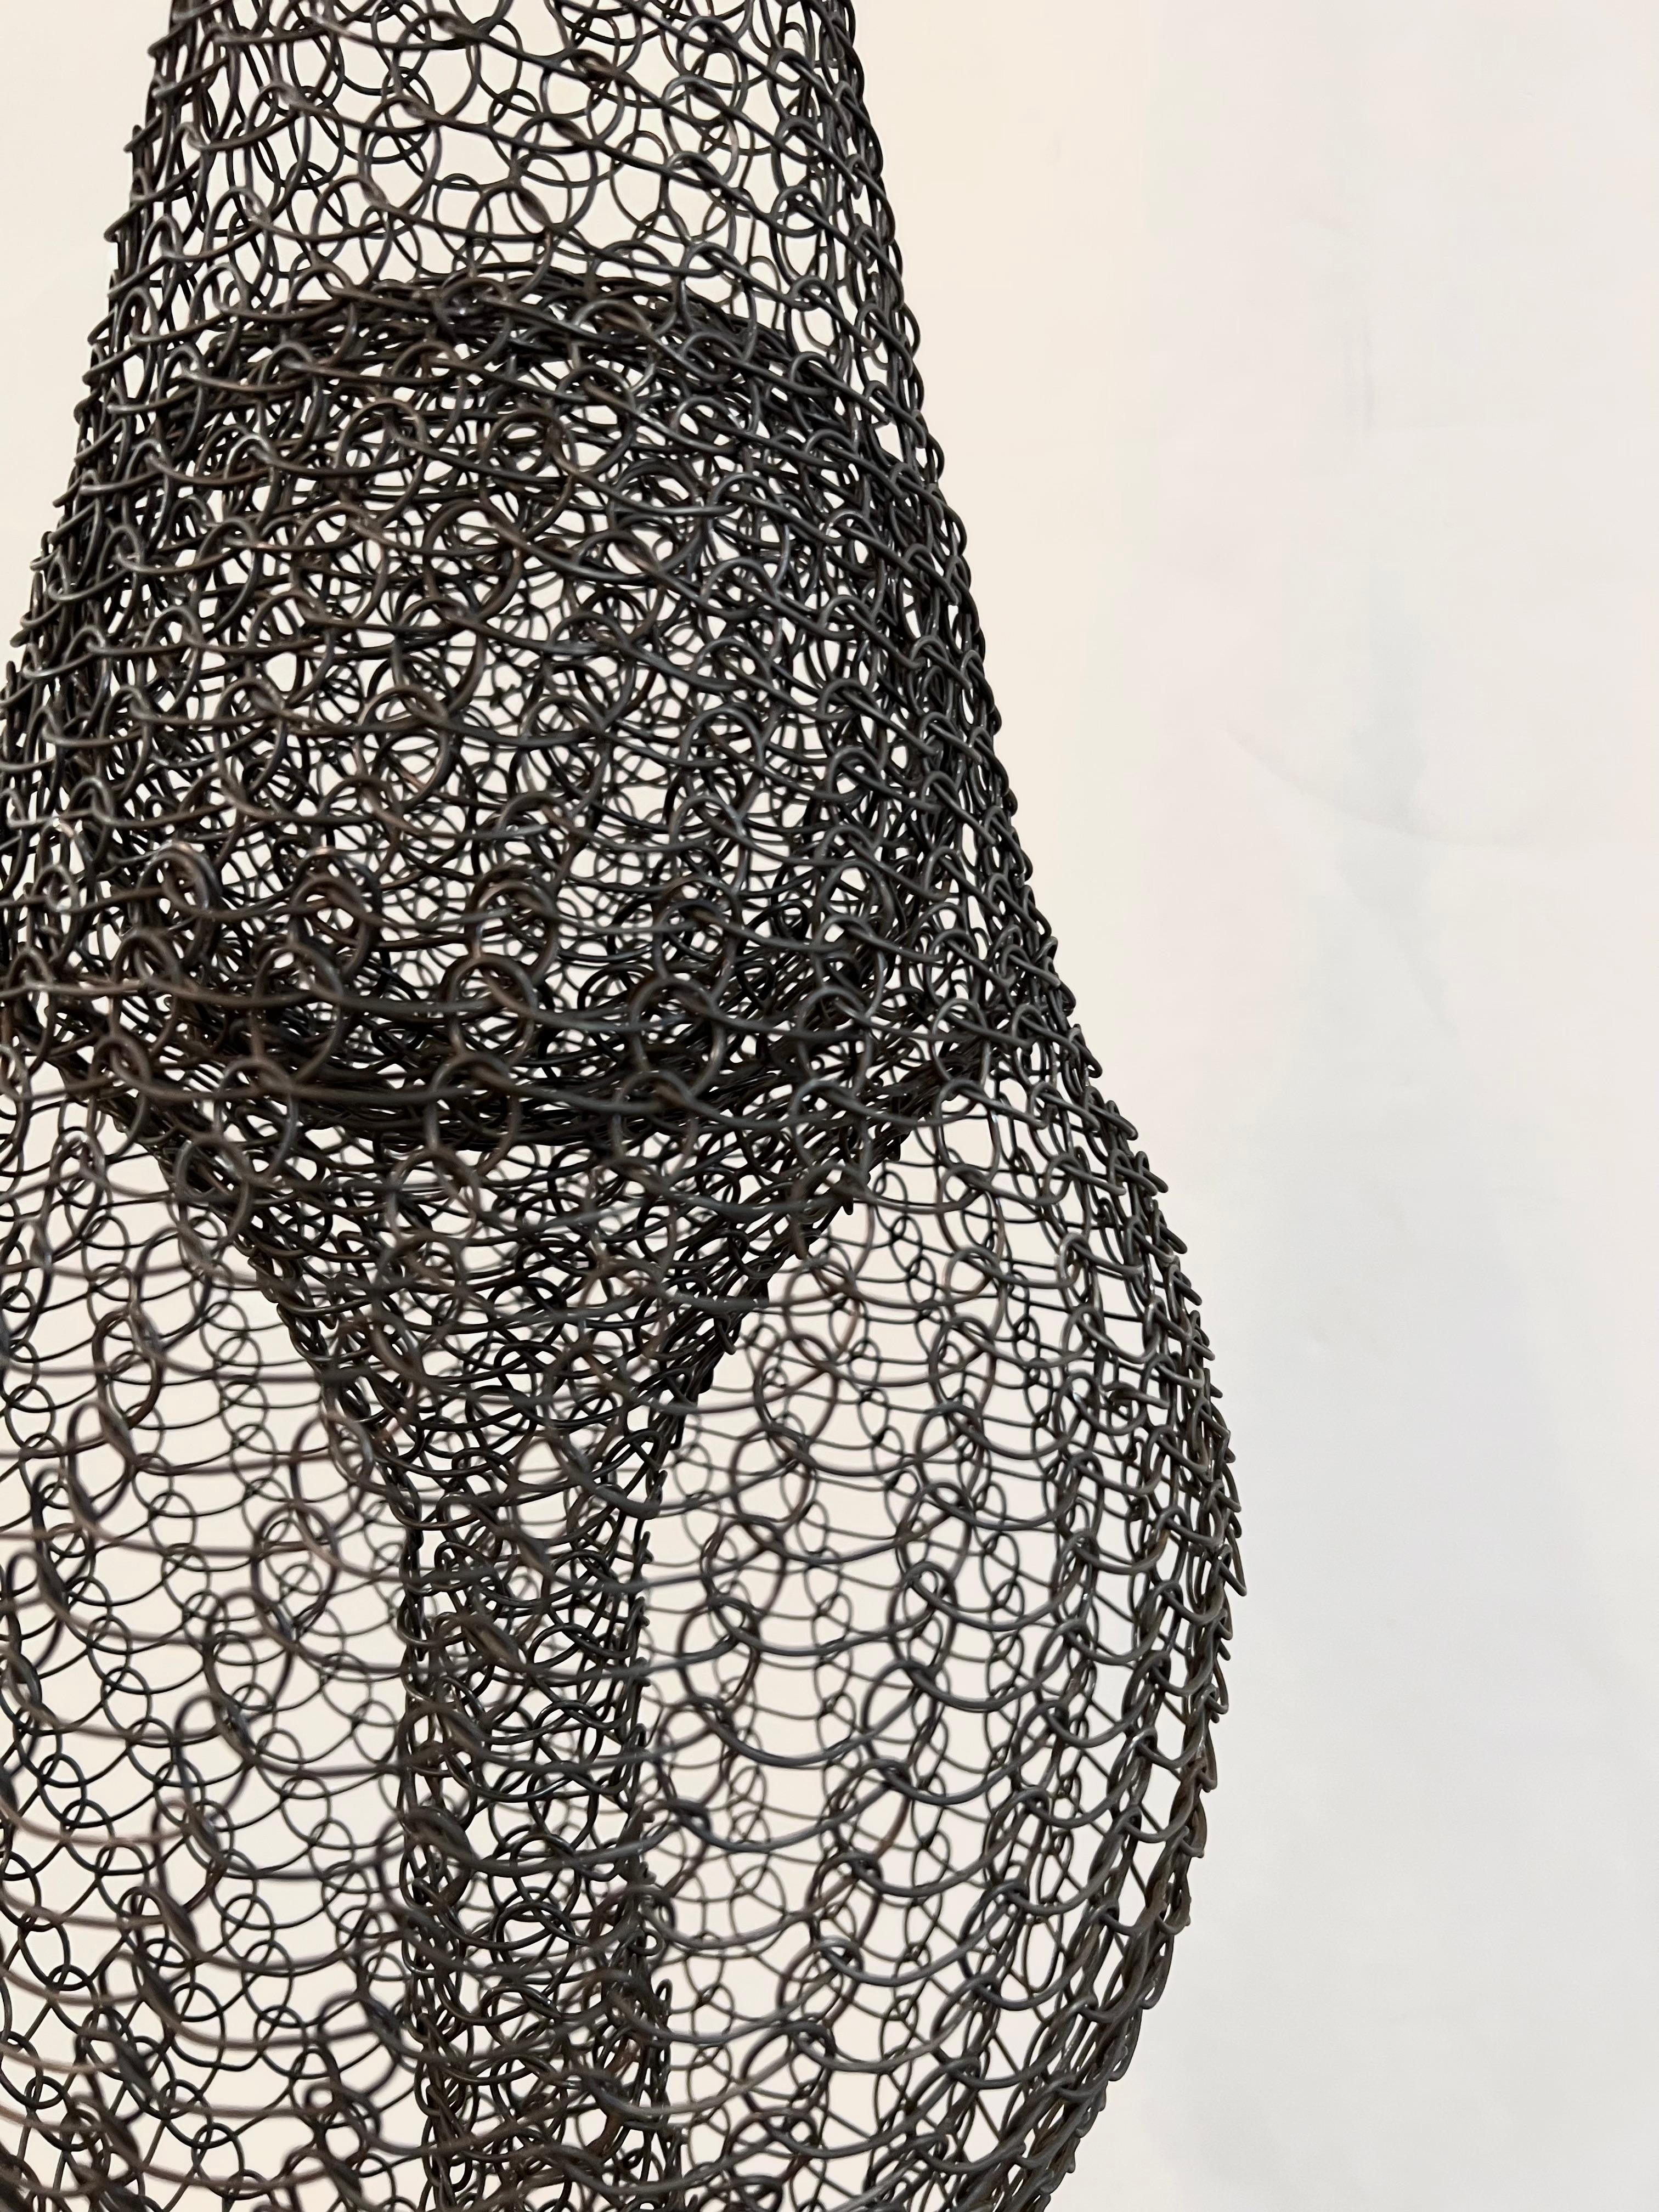 Contemporary Organic Woven Mesh Wire Sculpture by Ulrikk Dufosse For Sale